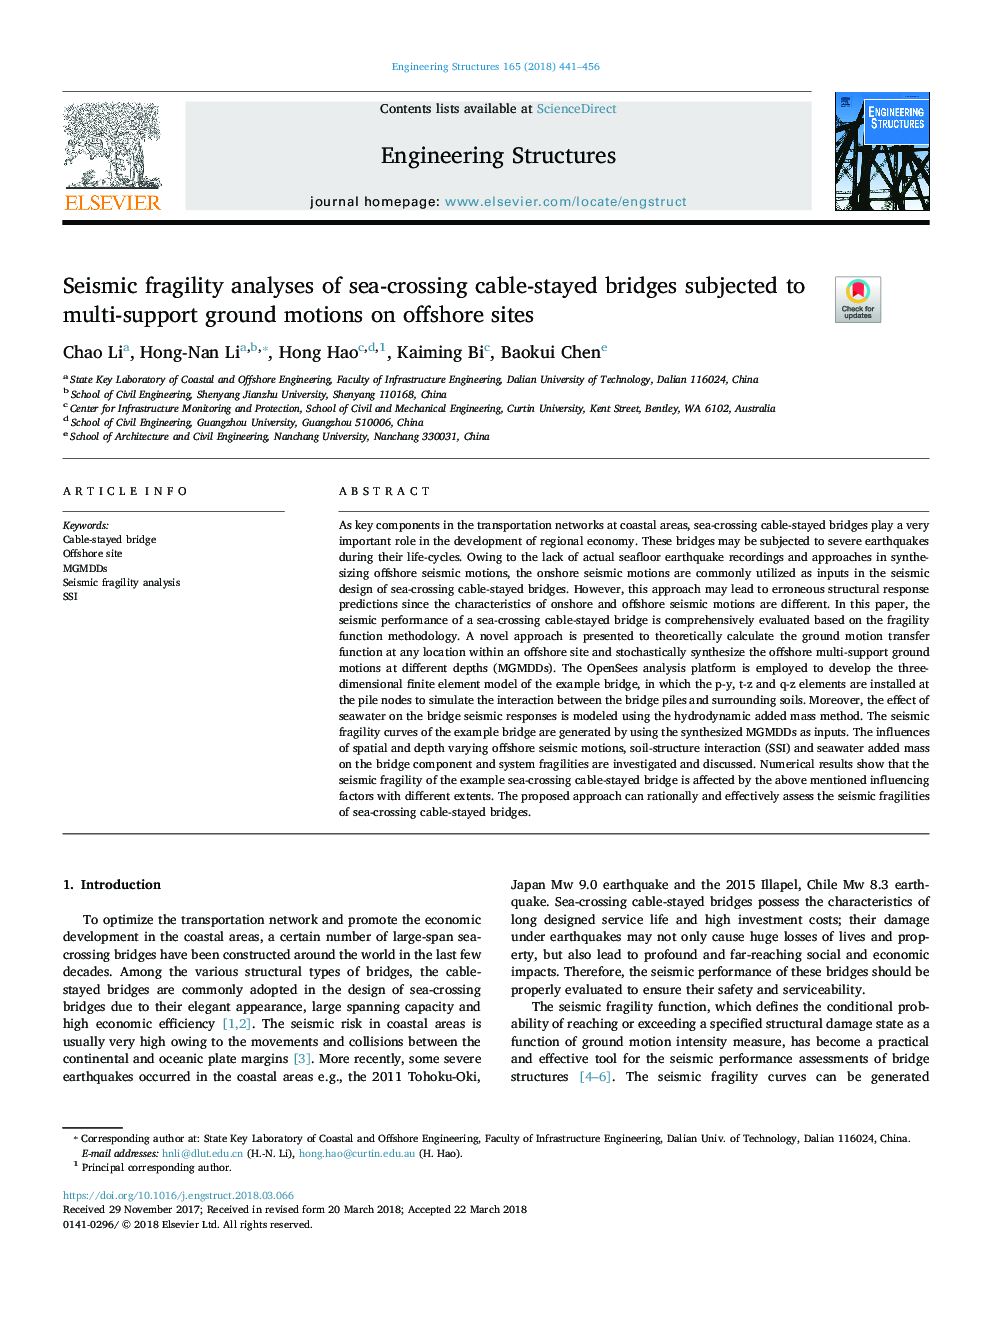 Seismic fragility analyses of sea-crossing cable-stayed bridges subjected to multi-support ground motions on offshore sites